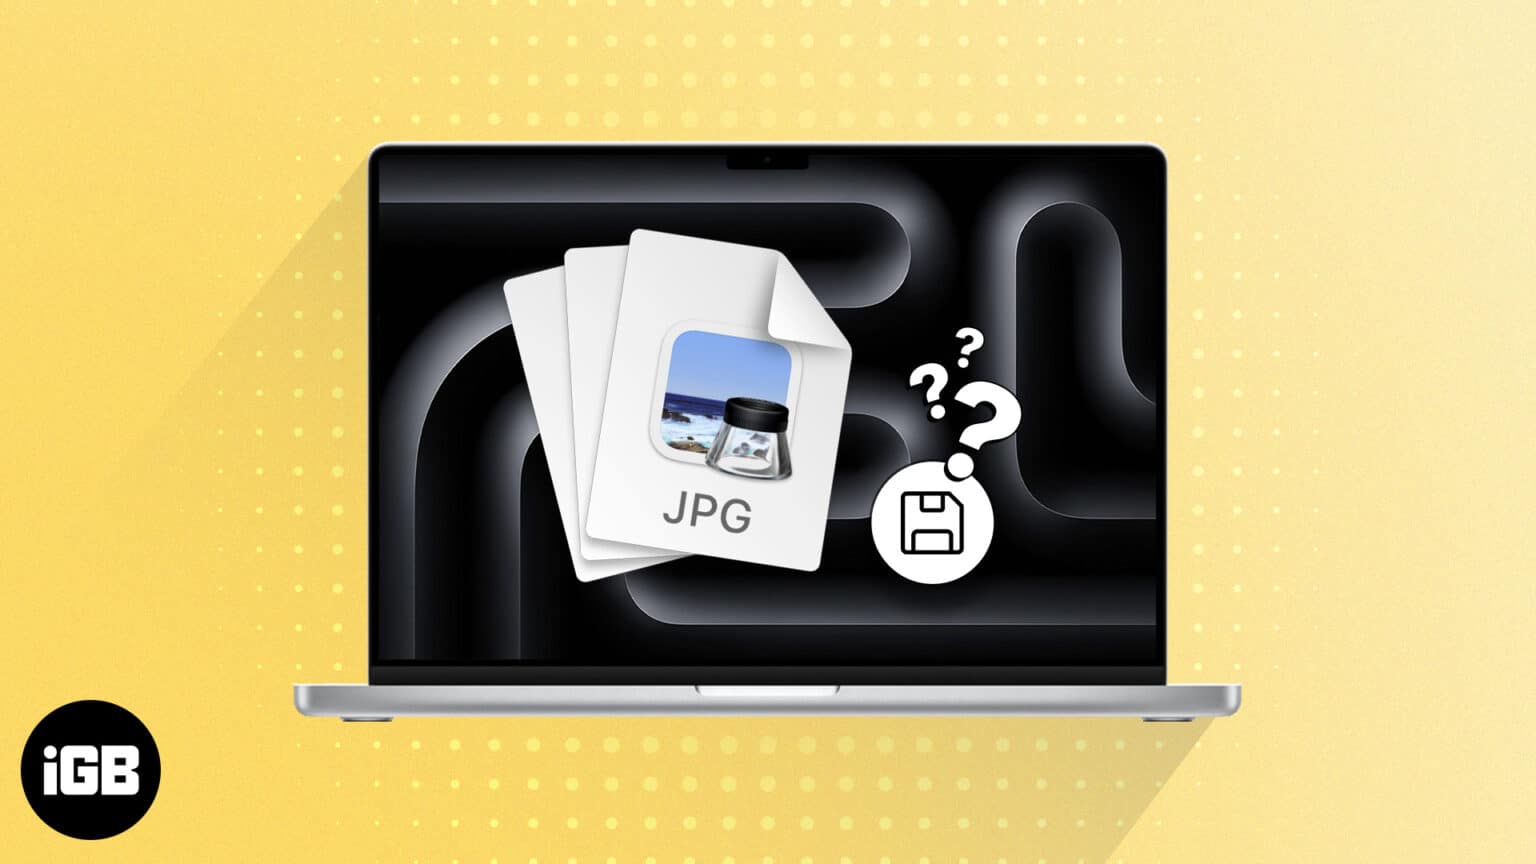 How to save image on Mac